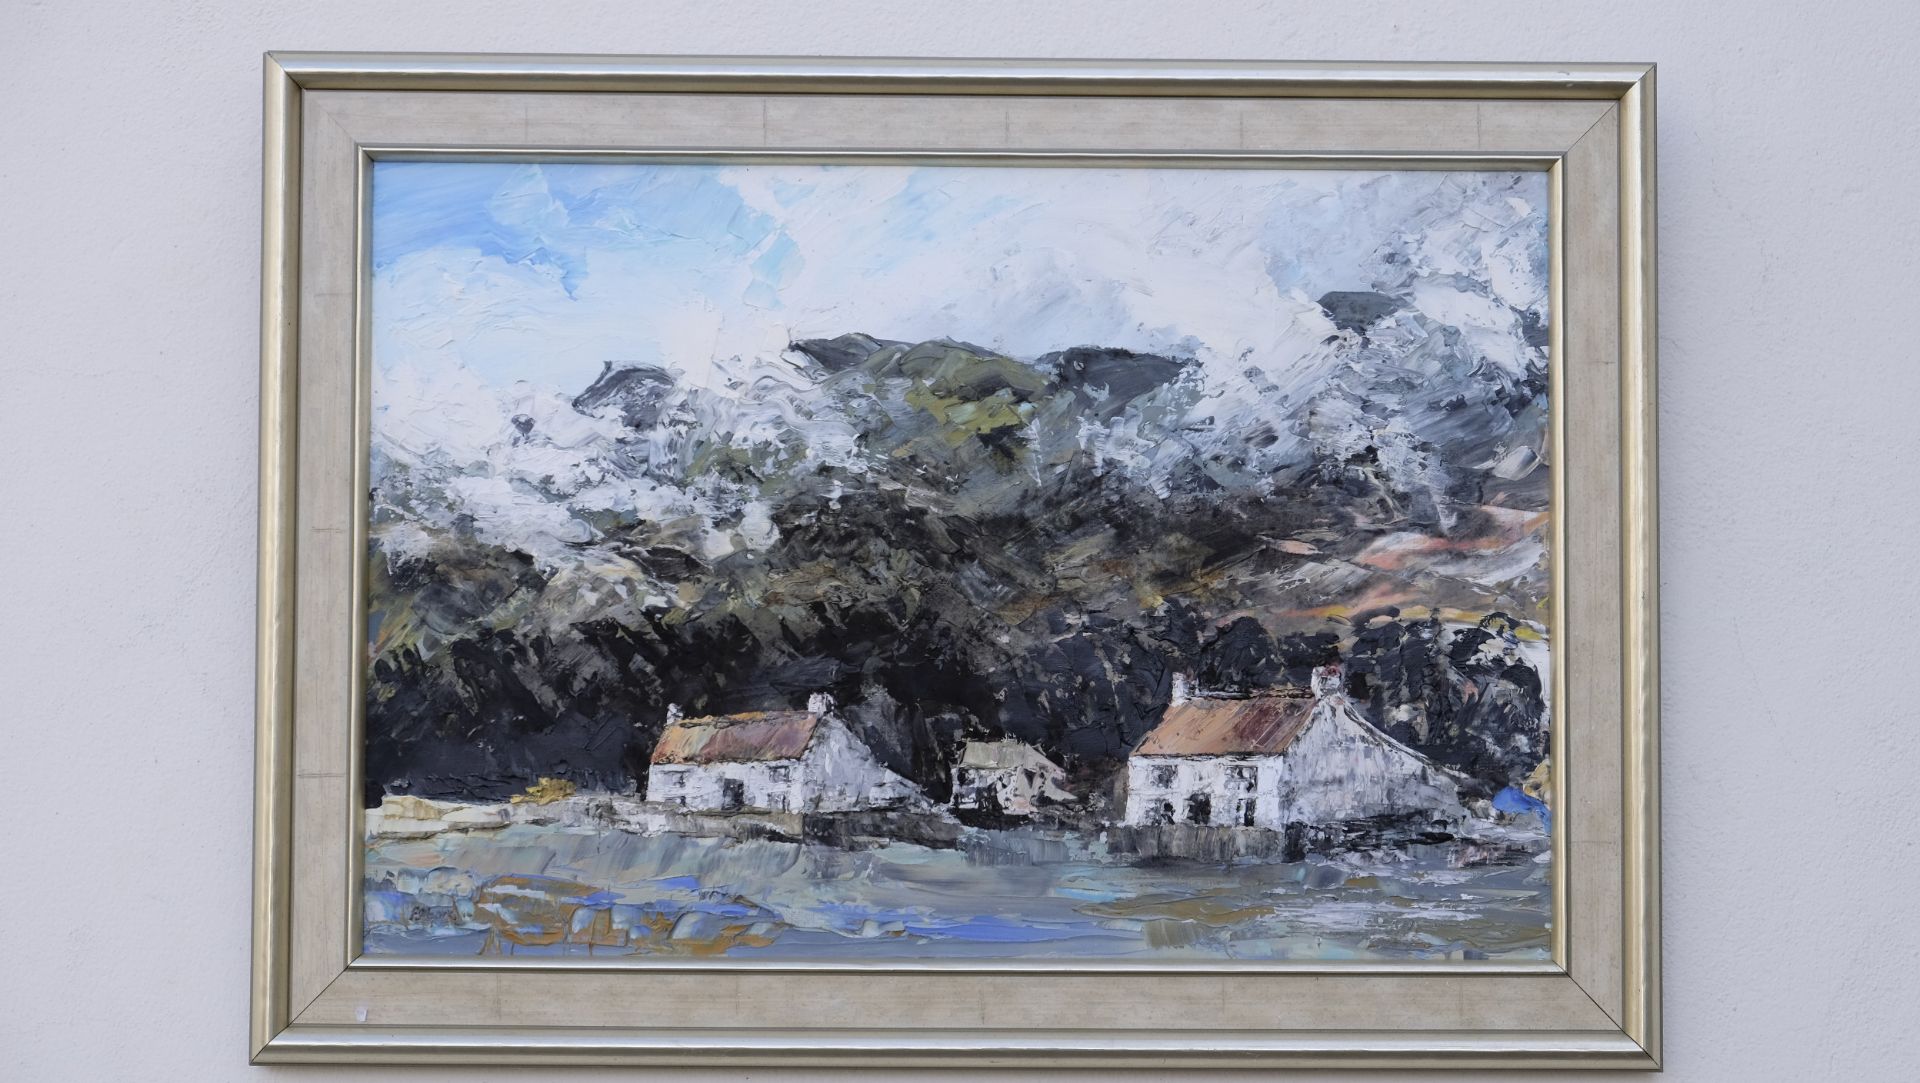 Peter Moore - Welsh Cottages Near Trefor Caenarfon. 1984, oil on canvas. 19" x 13". Signed and dated